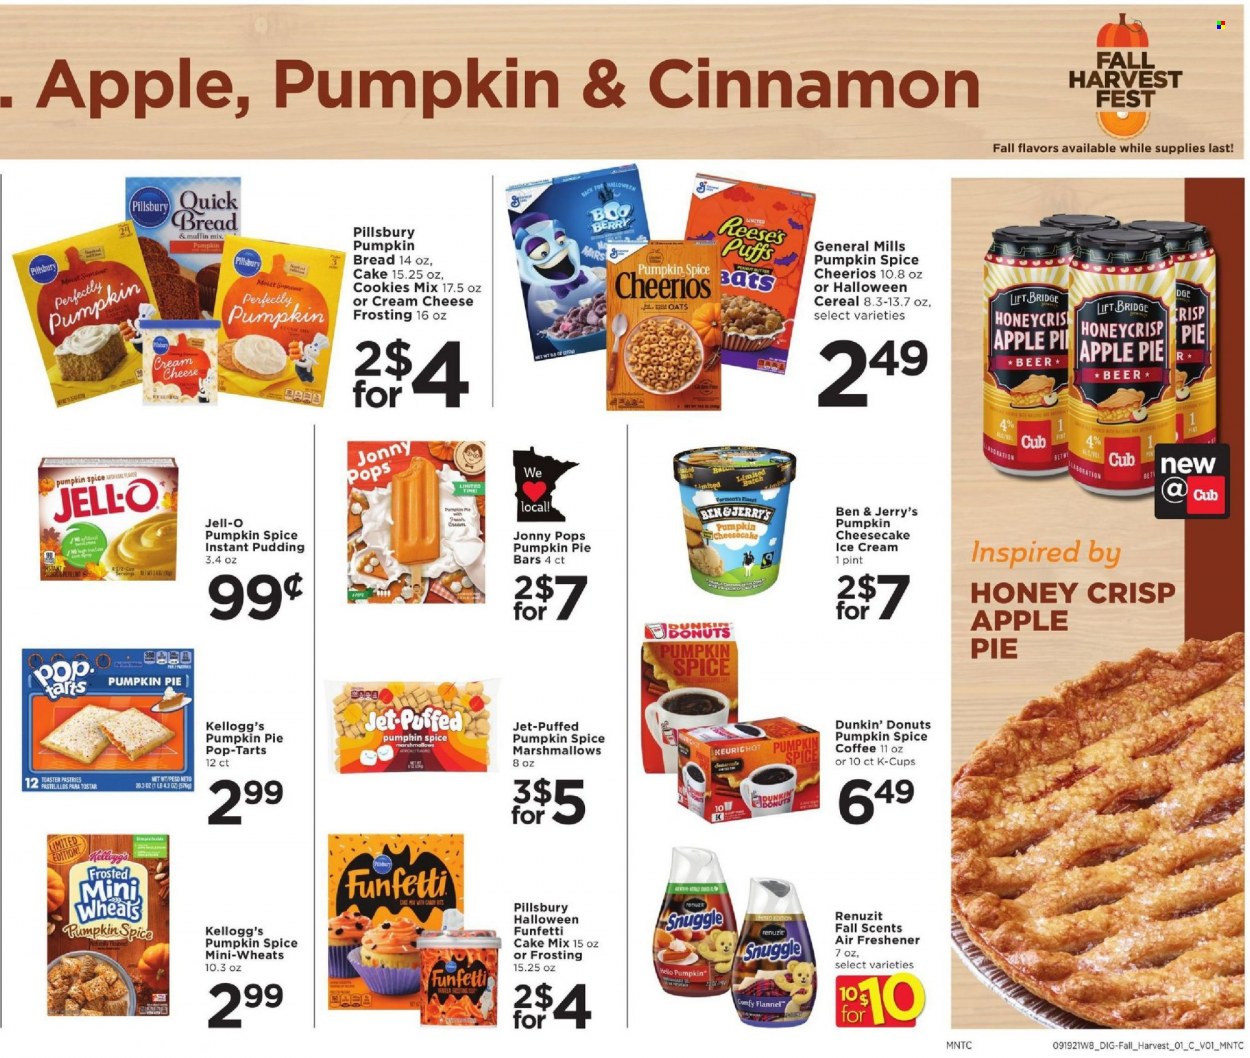 thumbnail - Cub Foods Flyer - 09/19/2021 - 09/25/2021 - Sales products - bread, pie, apple pie, puffs, cheesecake, donut, Dunkin' Donuts, cake mix, muffin mix, Pillsbury, cheese, pudding, Reese's, Ben & Jerry's, cookies, marshmallows, Mars, Kellogg's, Pop-Tarts, frosting, oats, Jell-O, cereals, Cheerios, spice, cinnamon, coffee, coffee capsules, K-Cups, beer, Snuggle, Jet. Page 5.